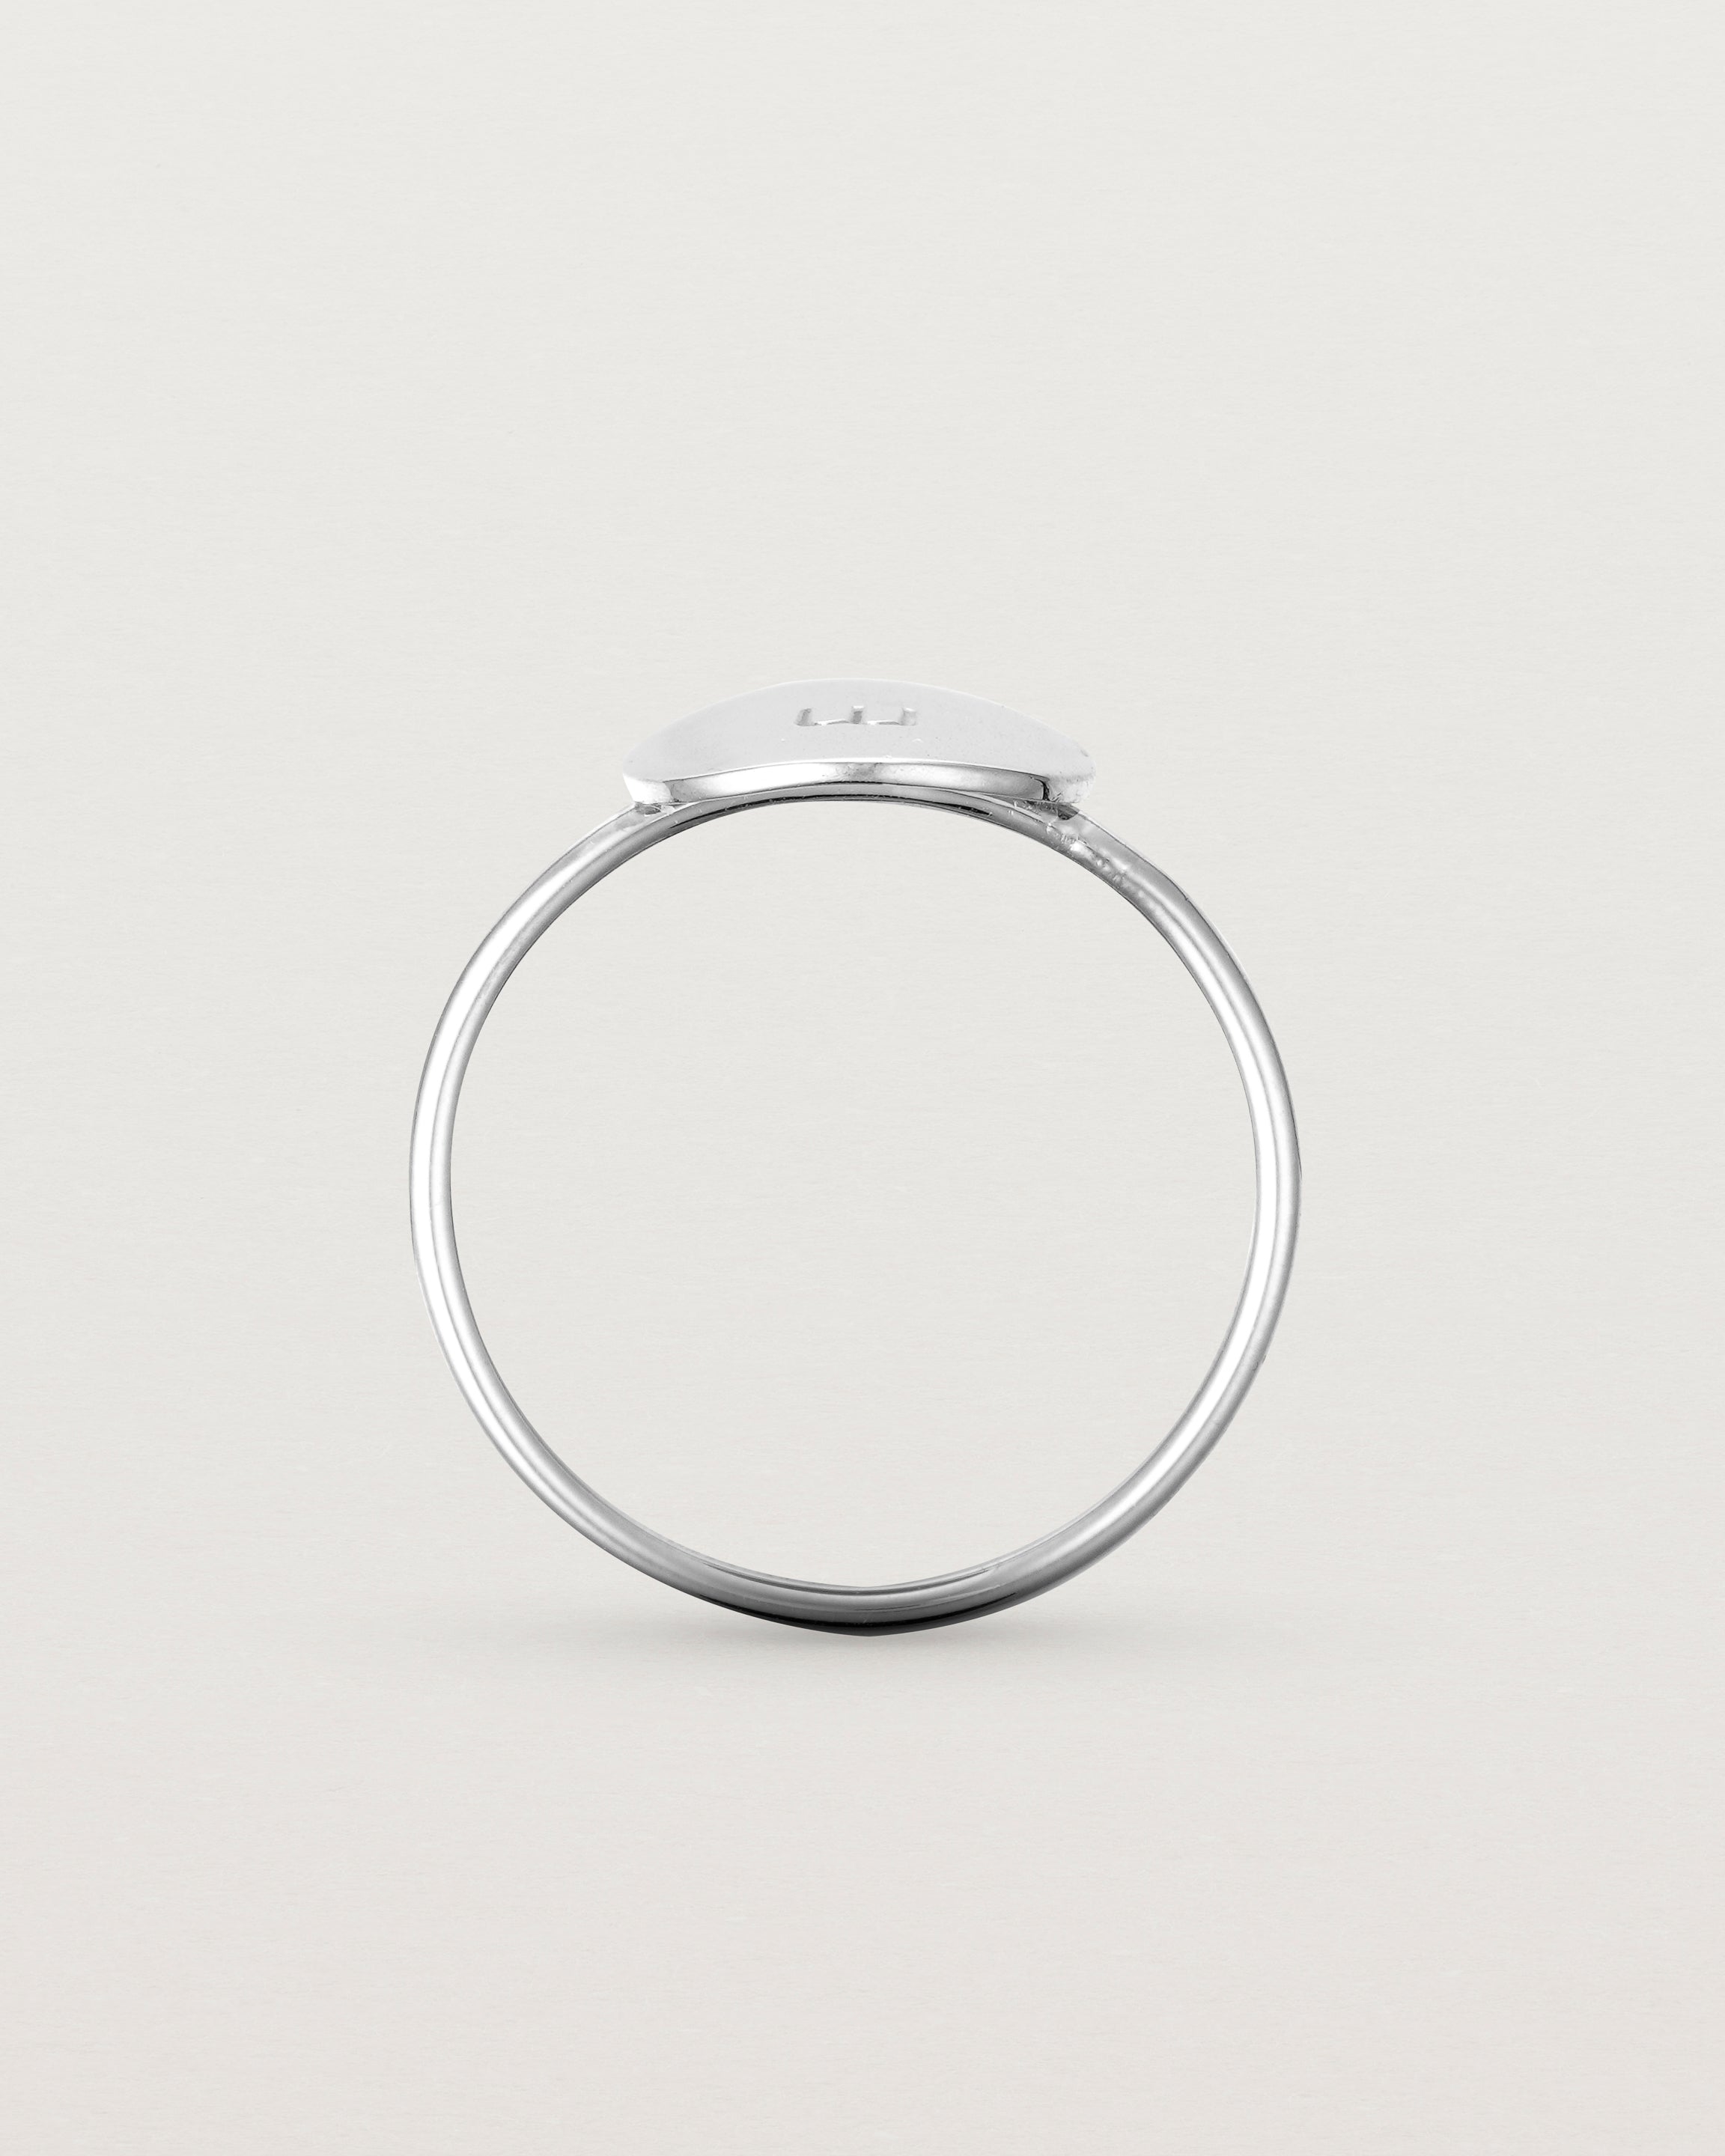 Standing view of the Mini Initial Ring in Sterling Silver.